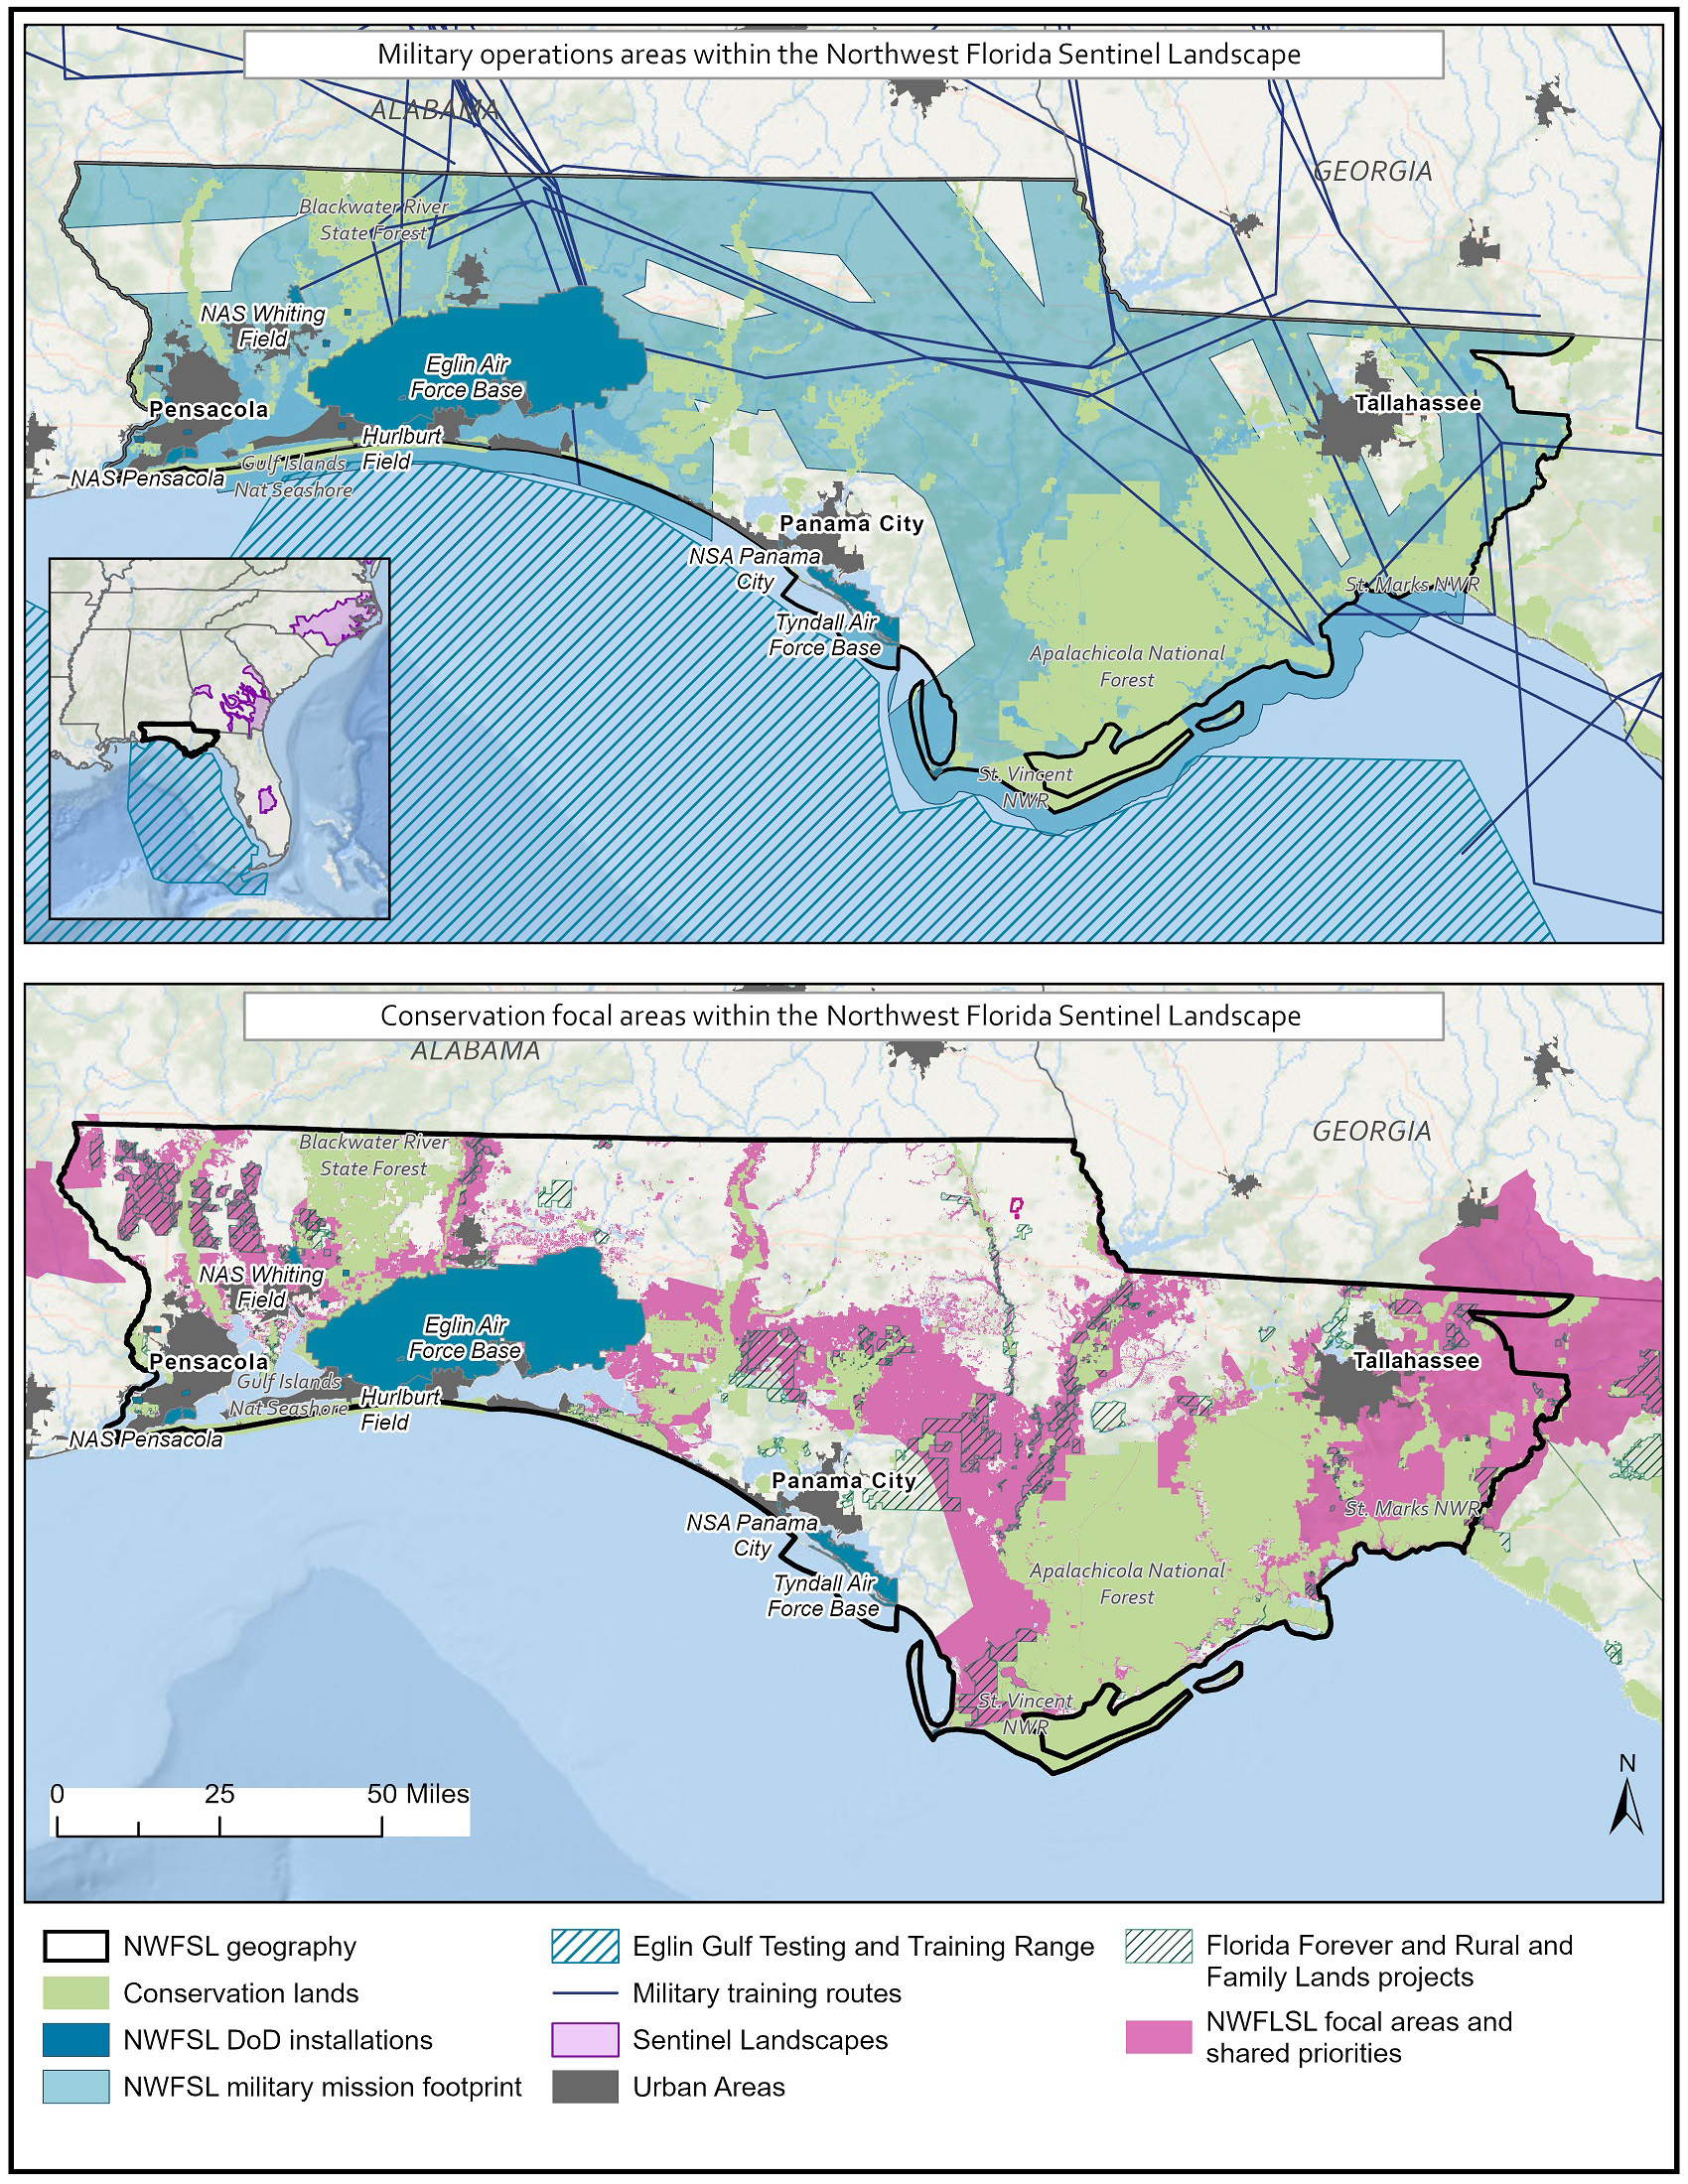 Map of the military operations areas and conservation focal areas within the Northwest Florida Sentinel Landscape.